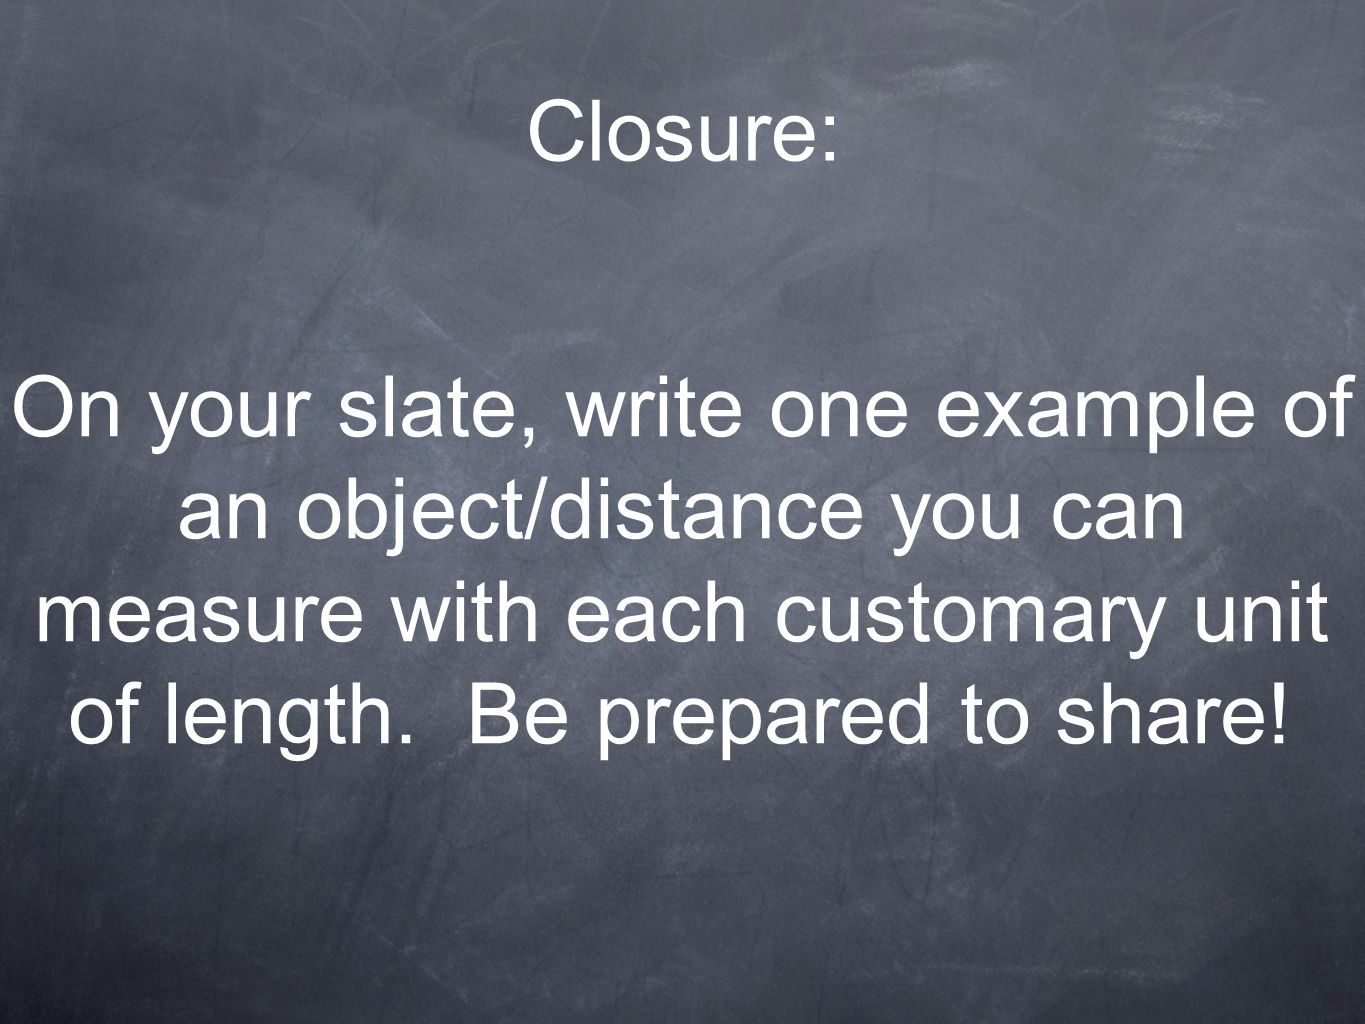 Closure: On your slate, write one example of an object/distance you can measure with each customary unit of length.